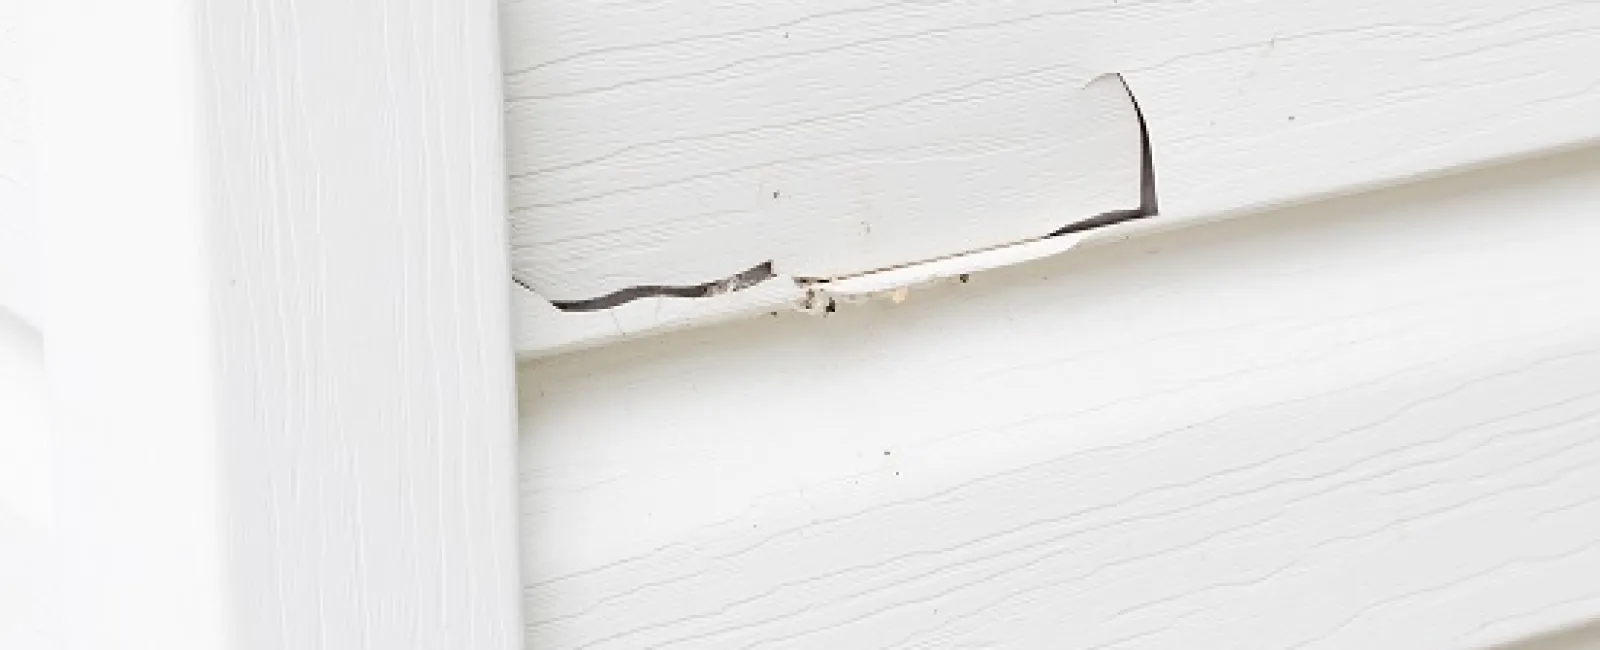 Telltale Signs Your Home’s Siding Needs to be Replaced